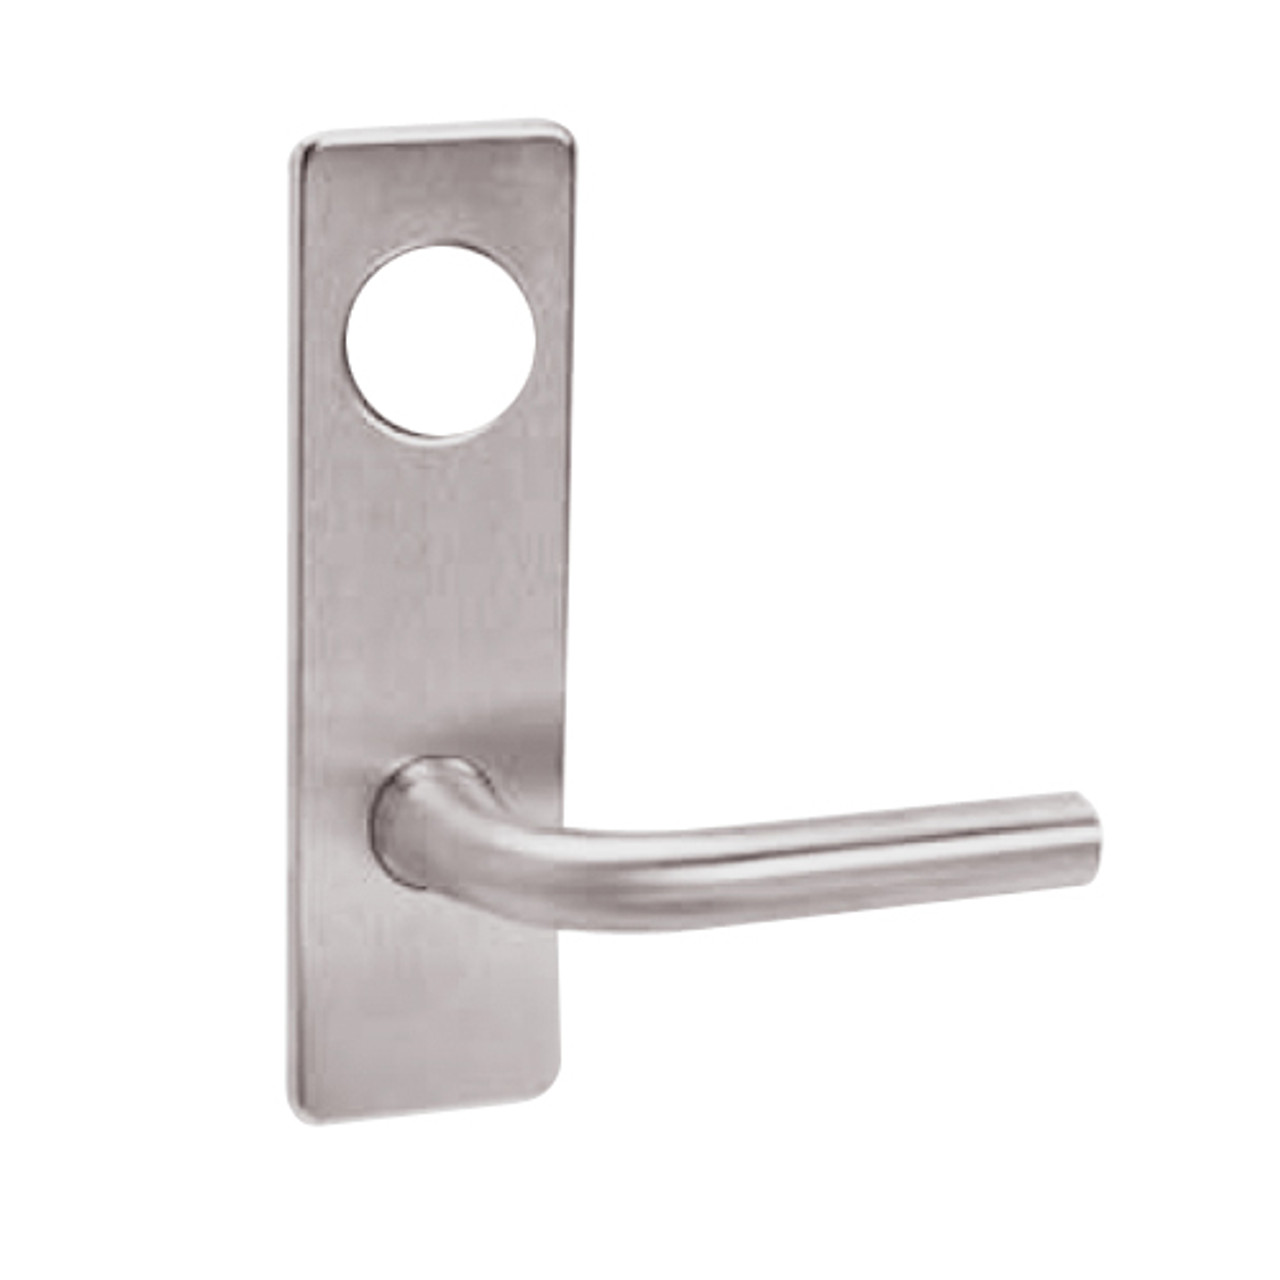 ML2065-RWN-630-CL7 Corbin Russwin ML2000 Series IC 7-Pin Less Core Mortise Dormitory Locksets with Regis Lever in Satin Stainless